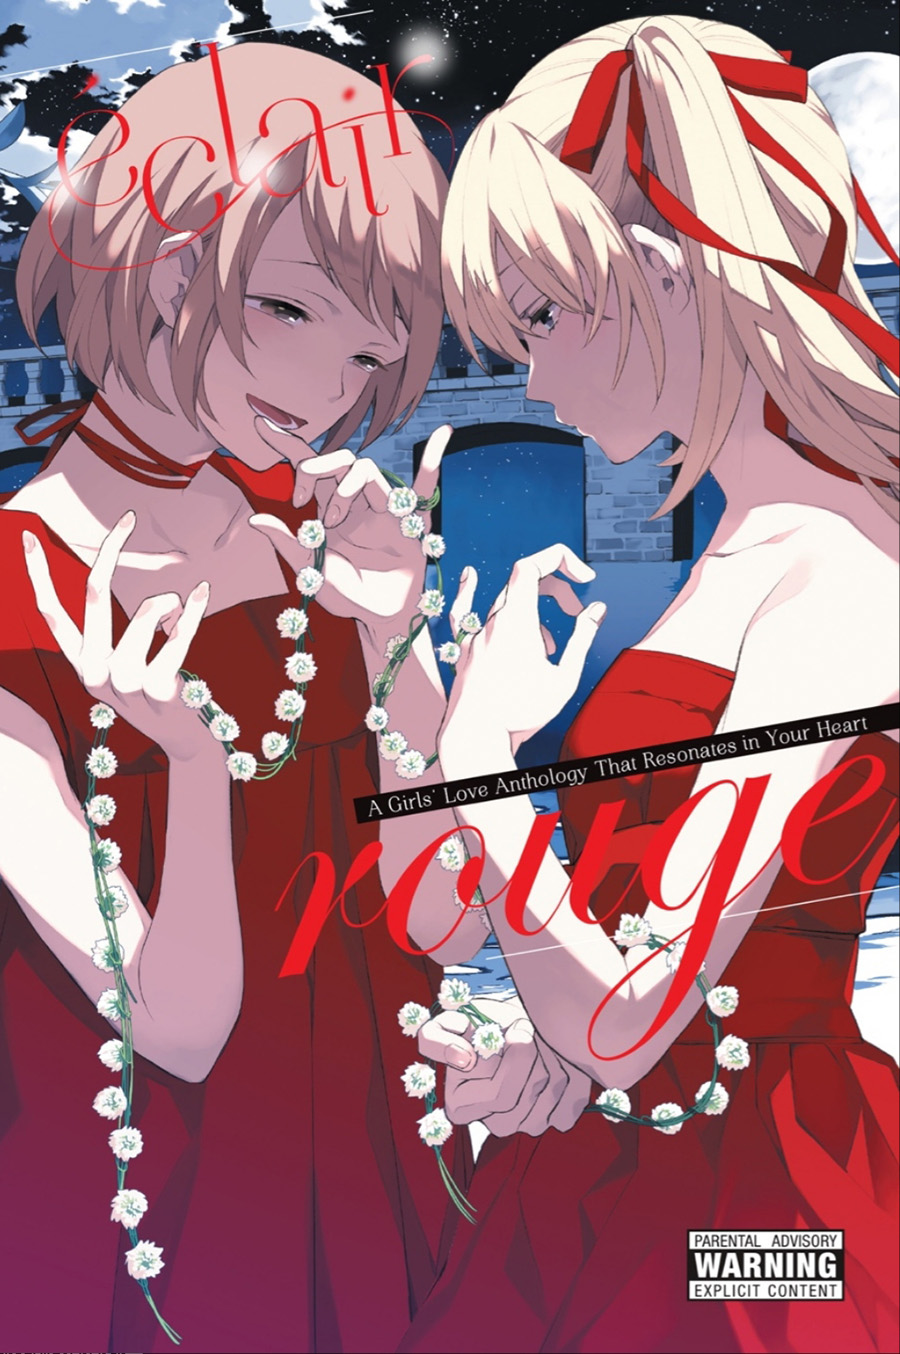 Eclair Rouge A Girls Love Anthology That Resonates In Your Heart GN